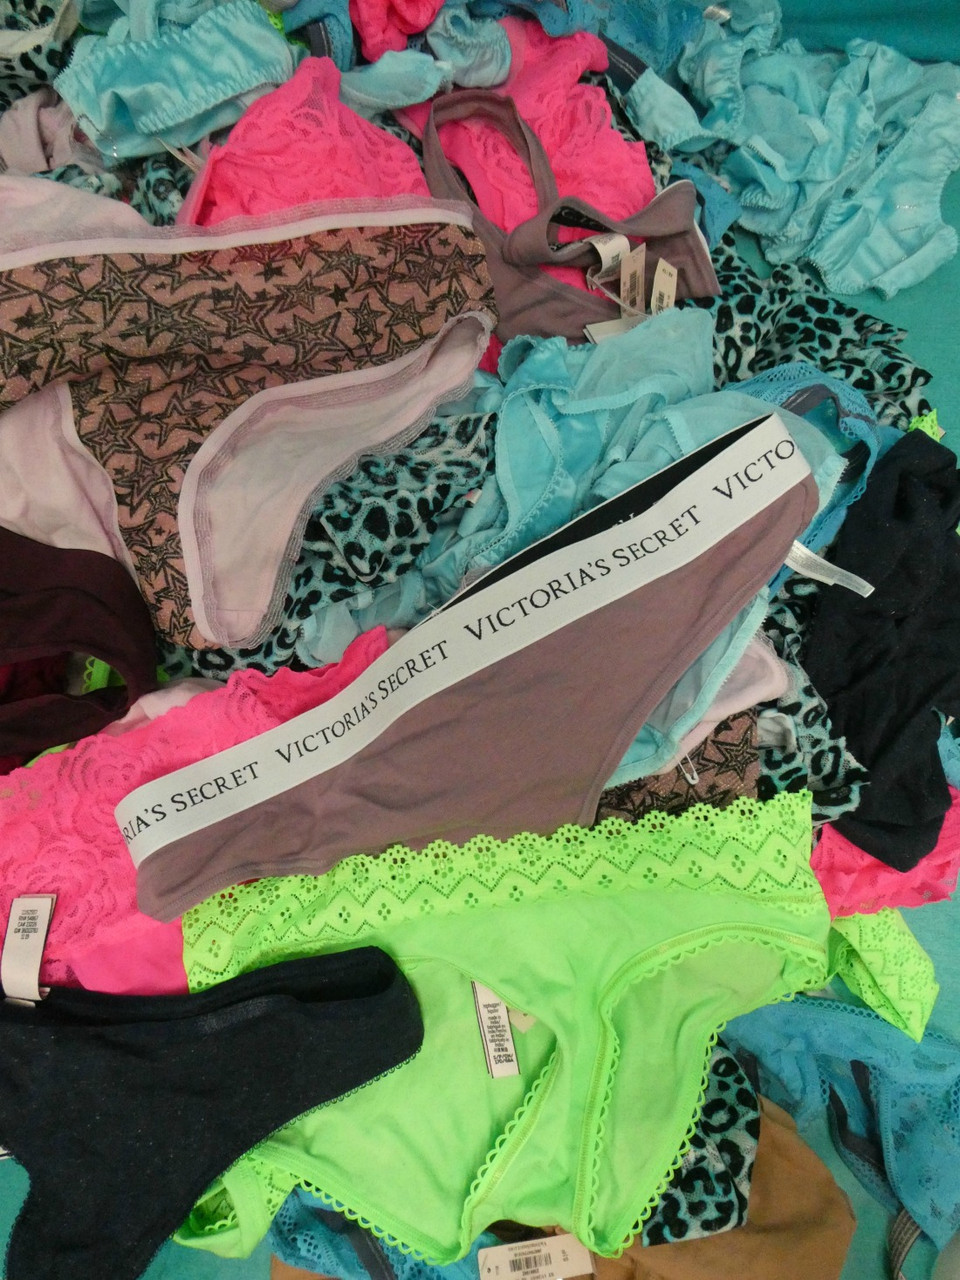 Victoria's Secret PINK Women's Apparel for sale in Indianapolis